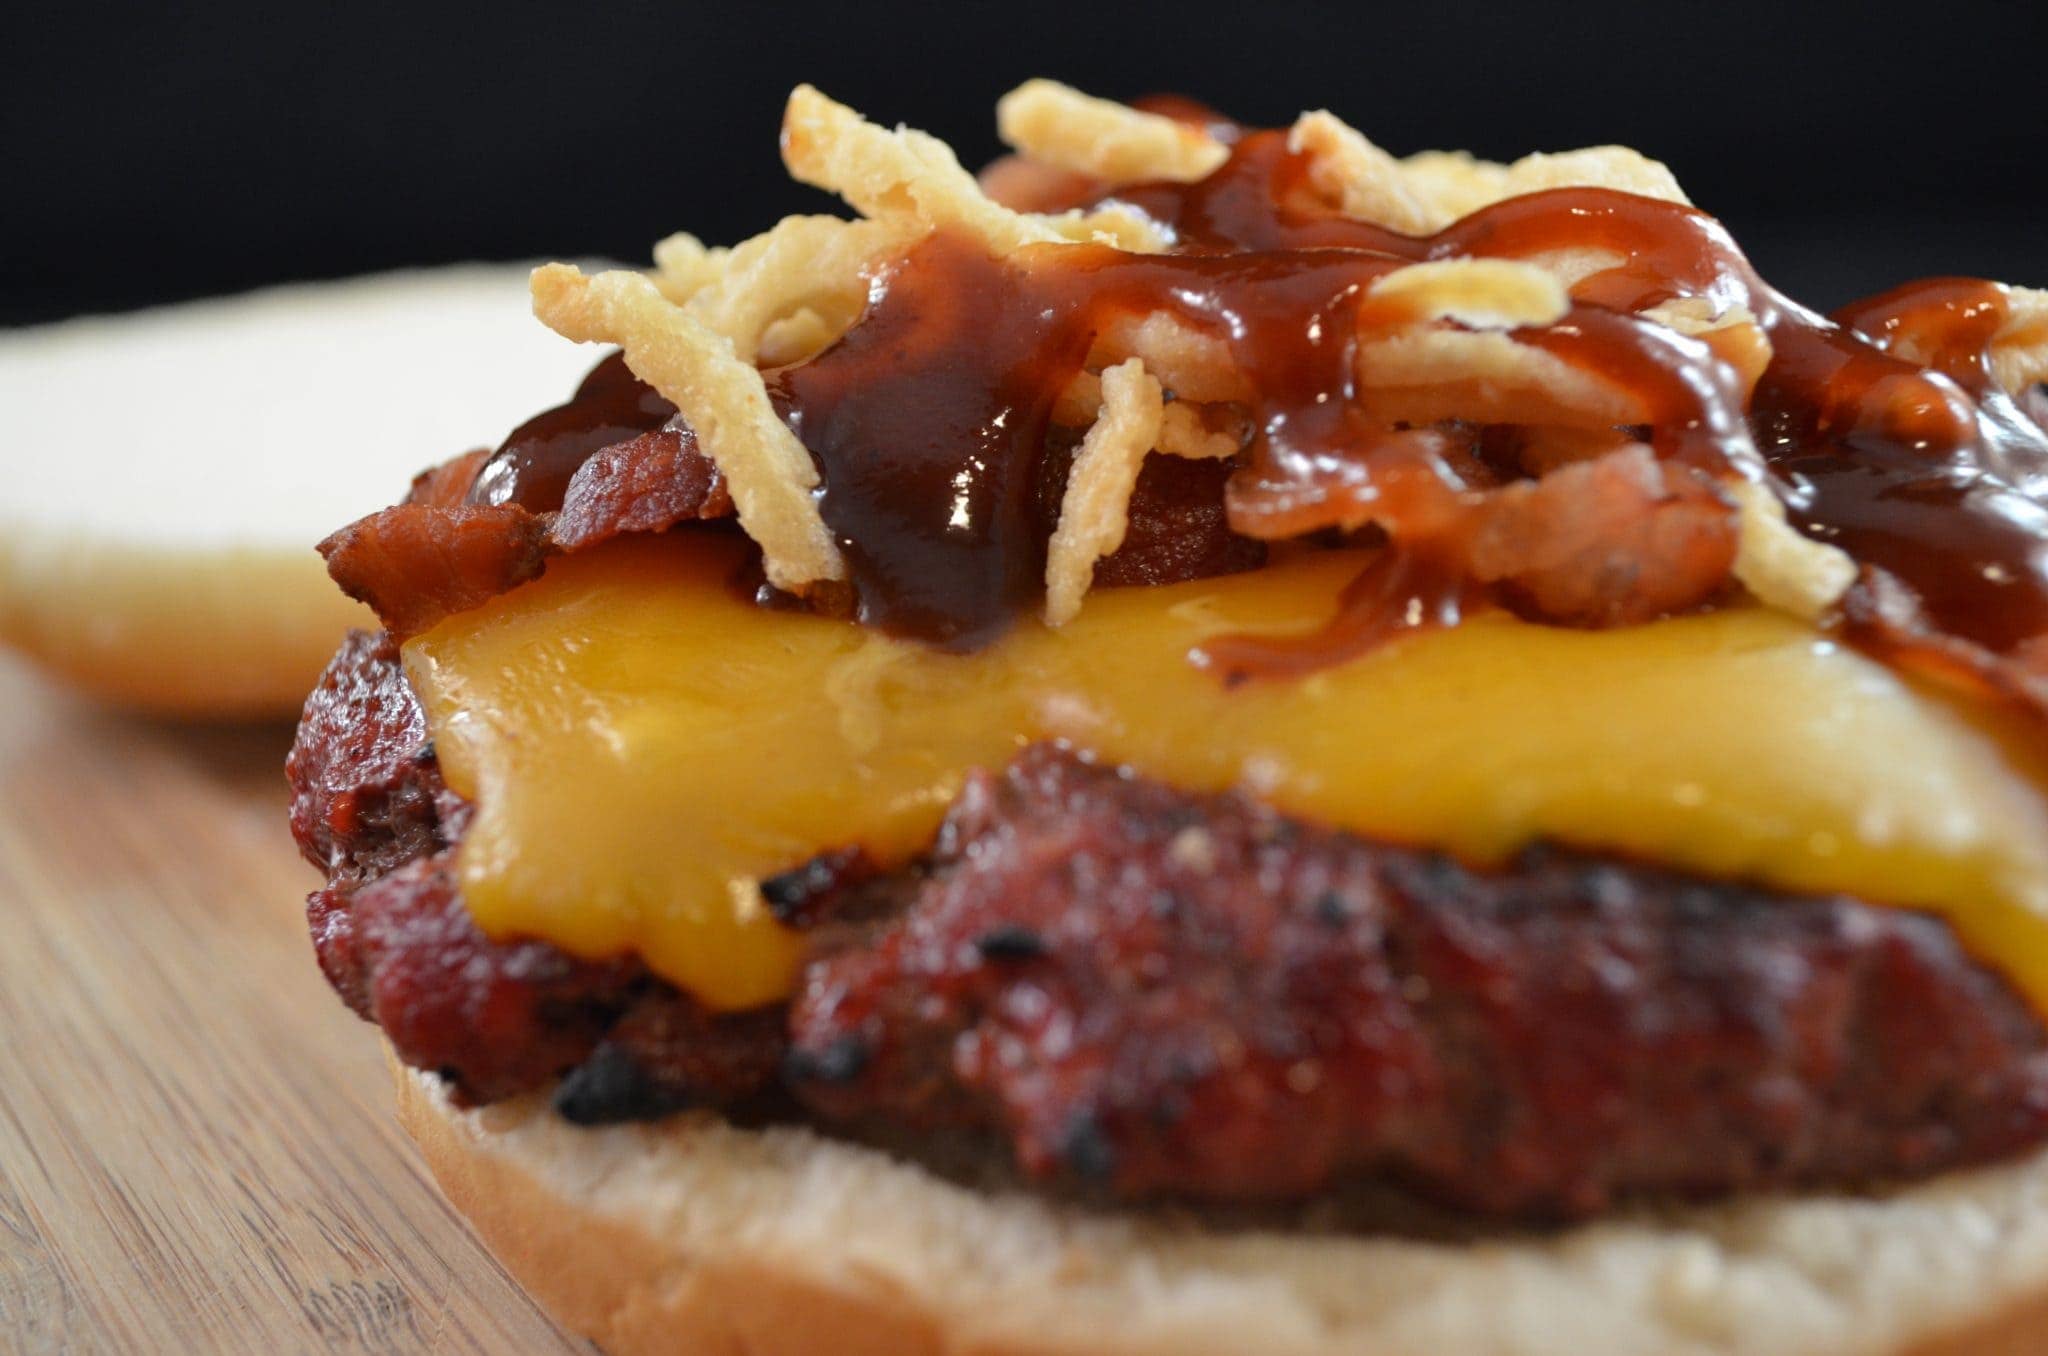 Close up view of western burgers with cheese and bbq sauce.